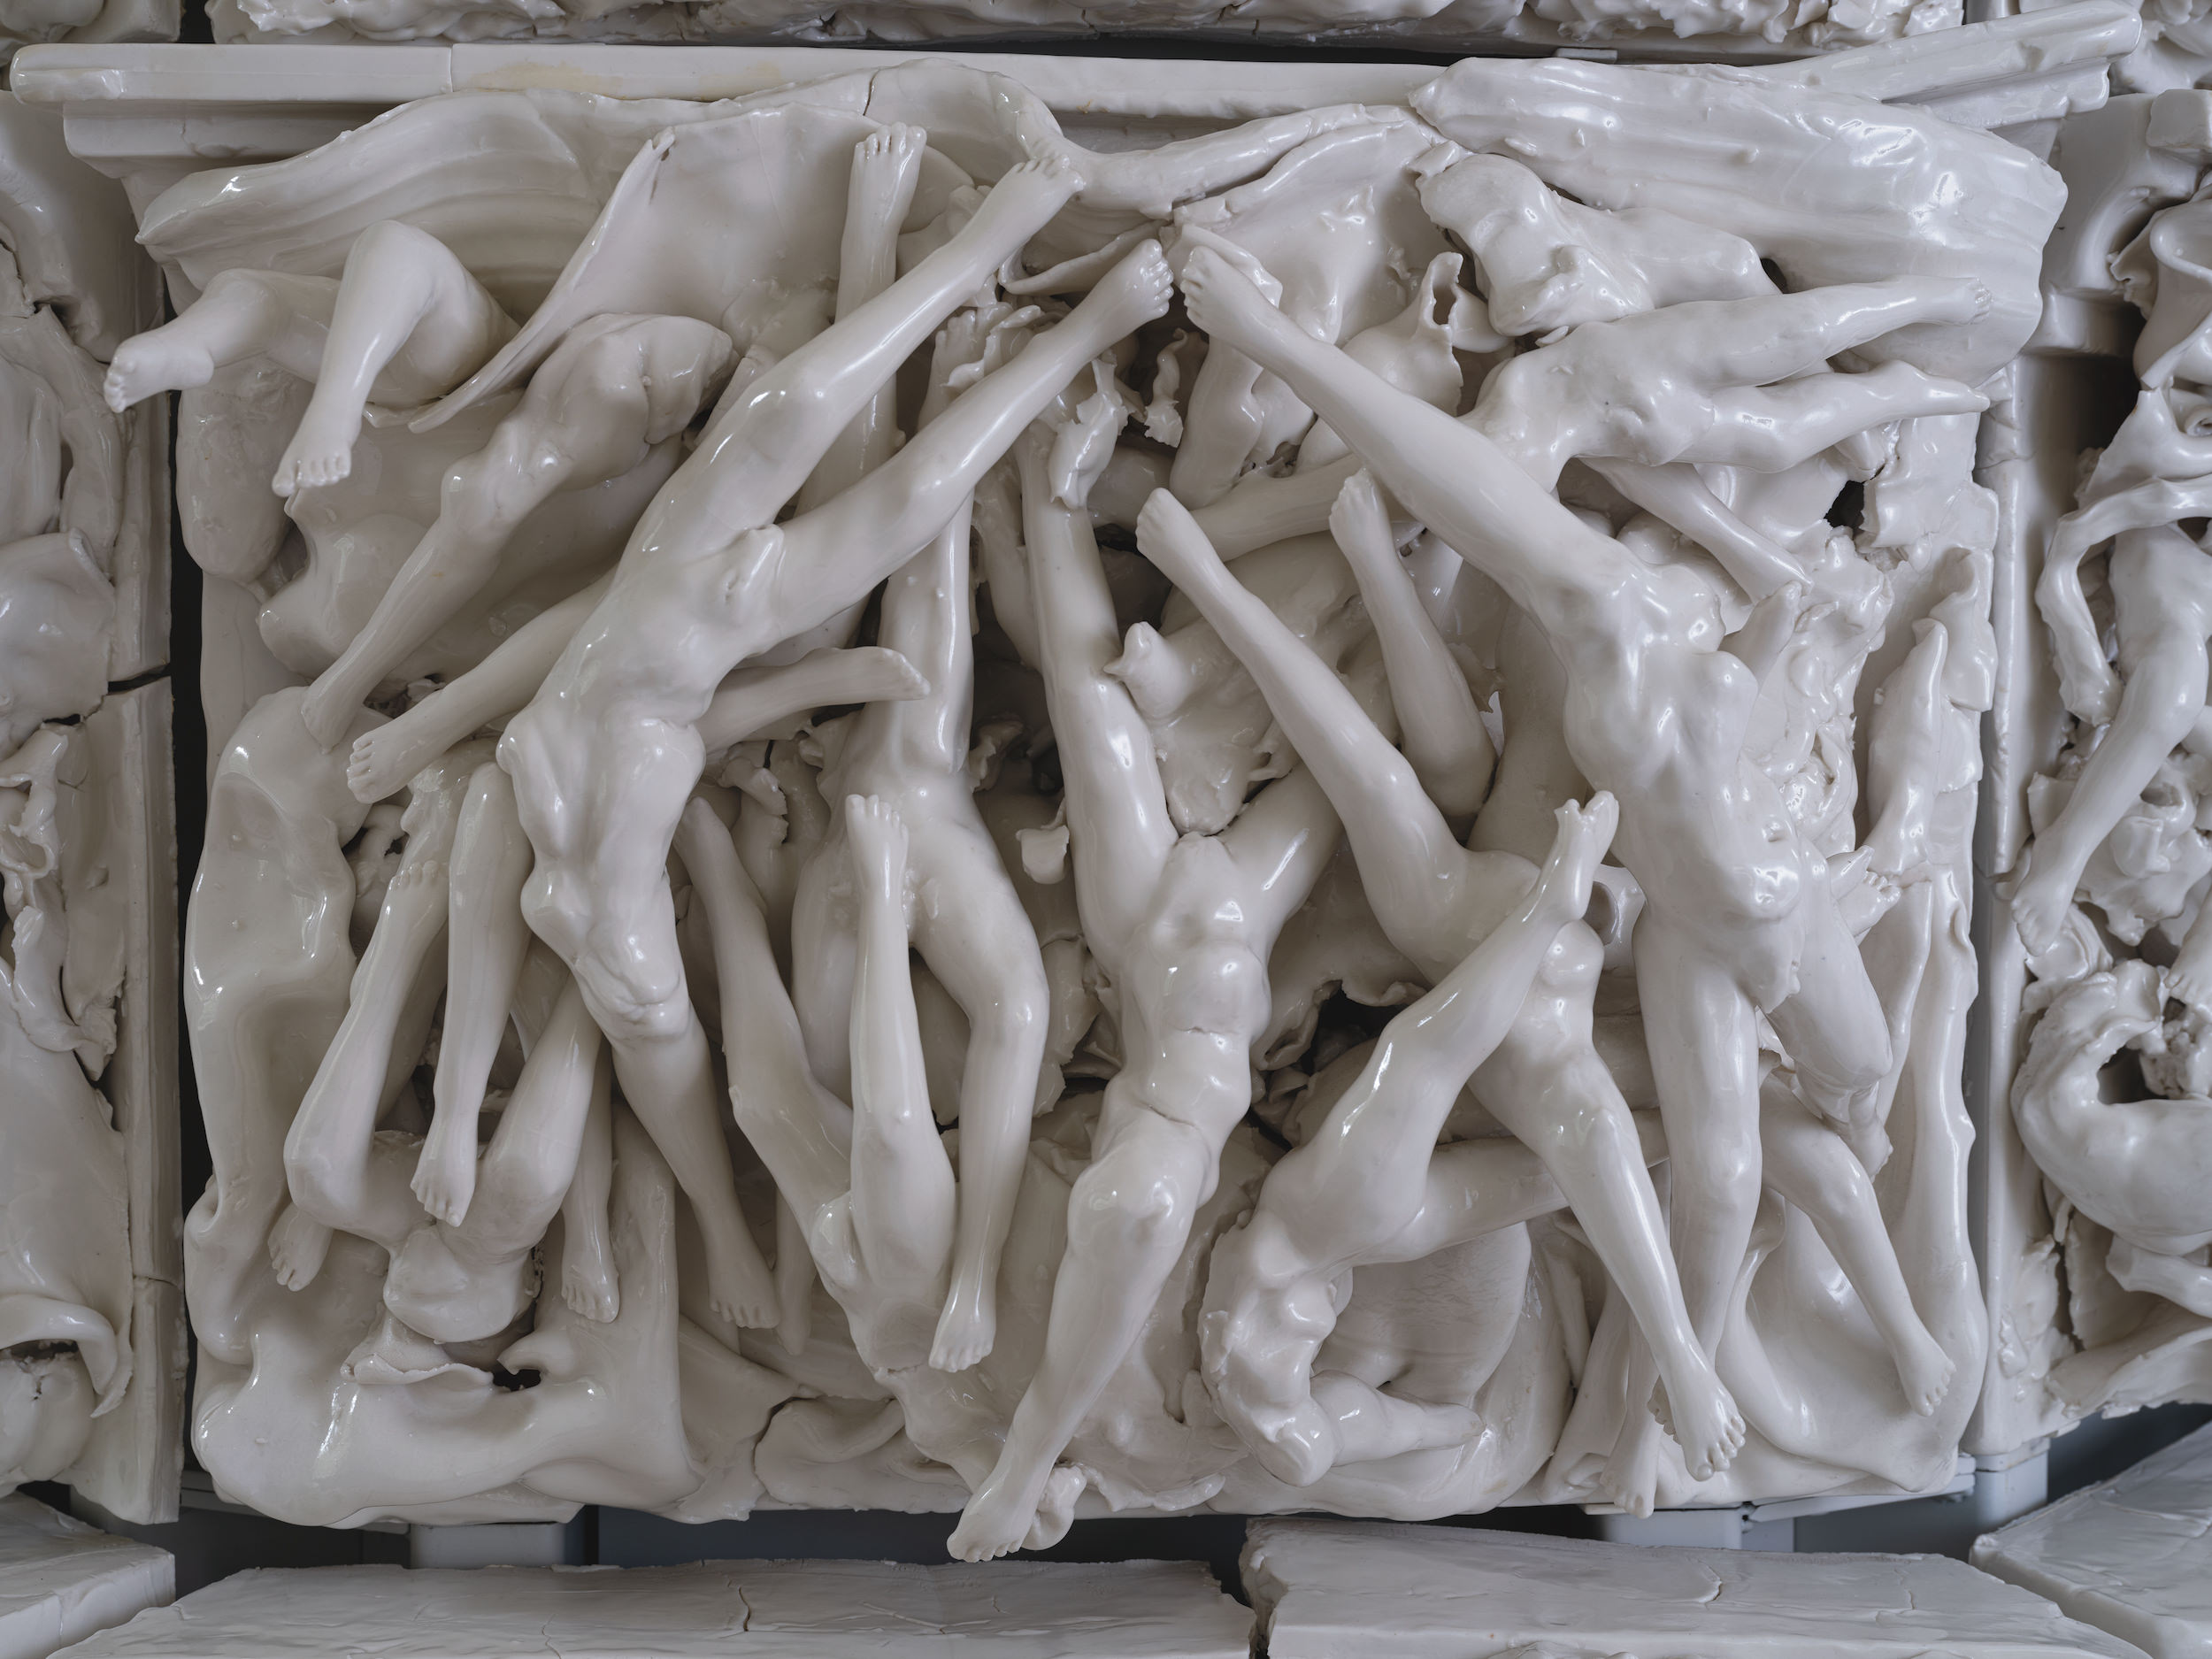 Porcelain tile of torsos and legs intertwined.